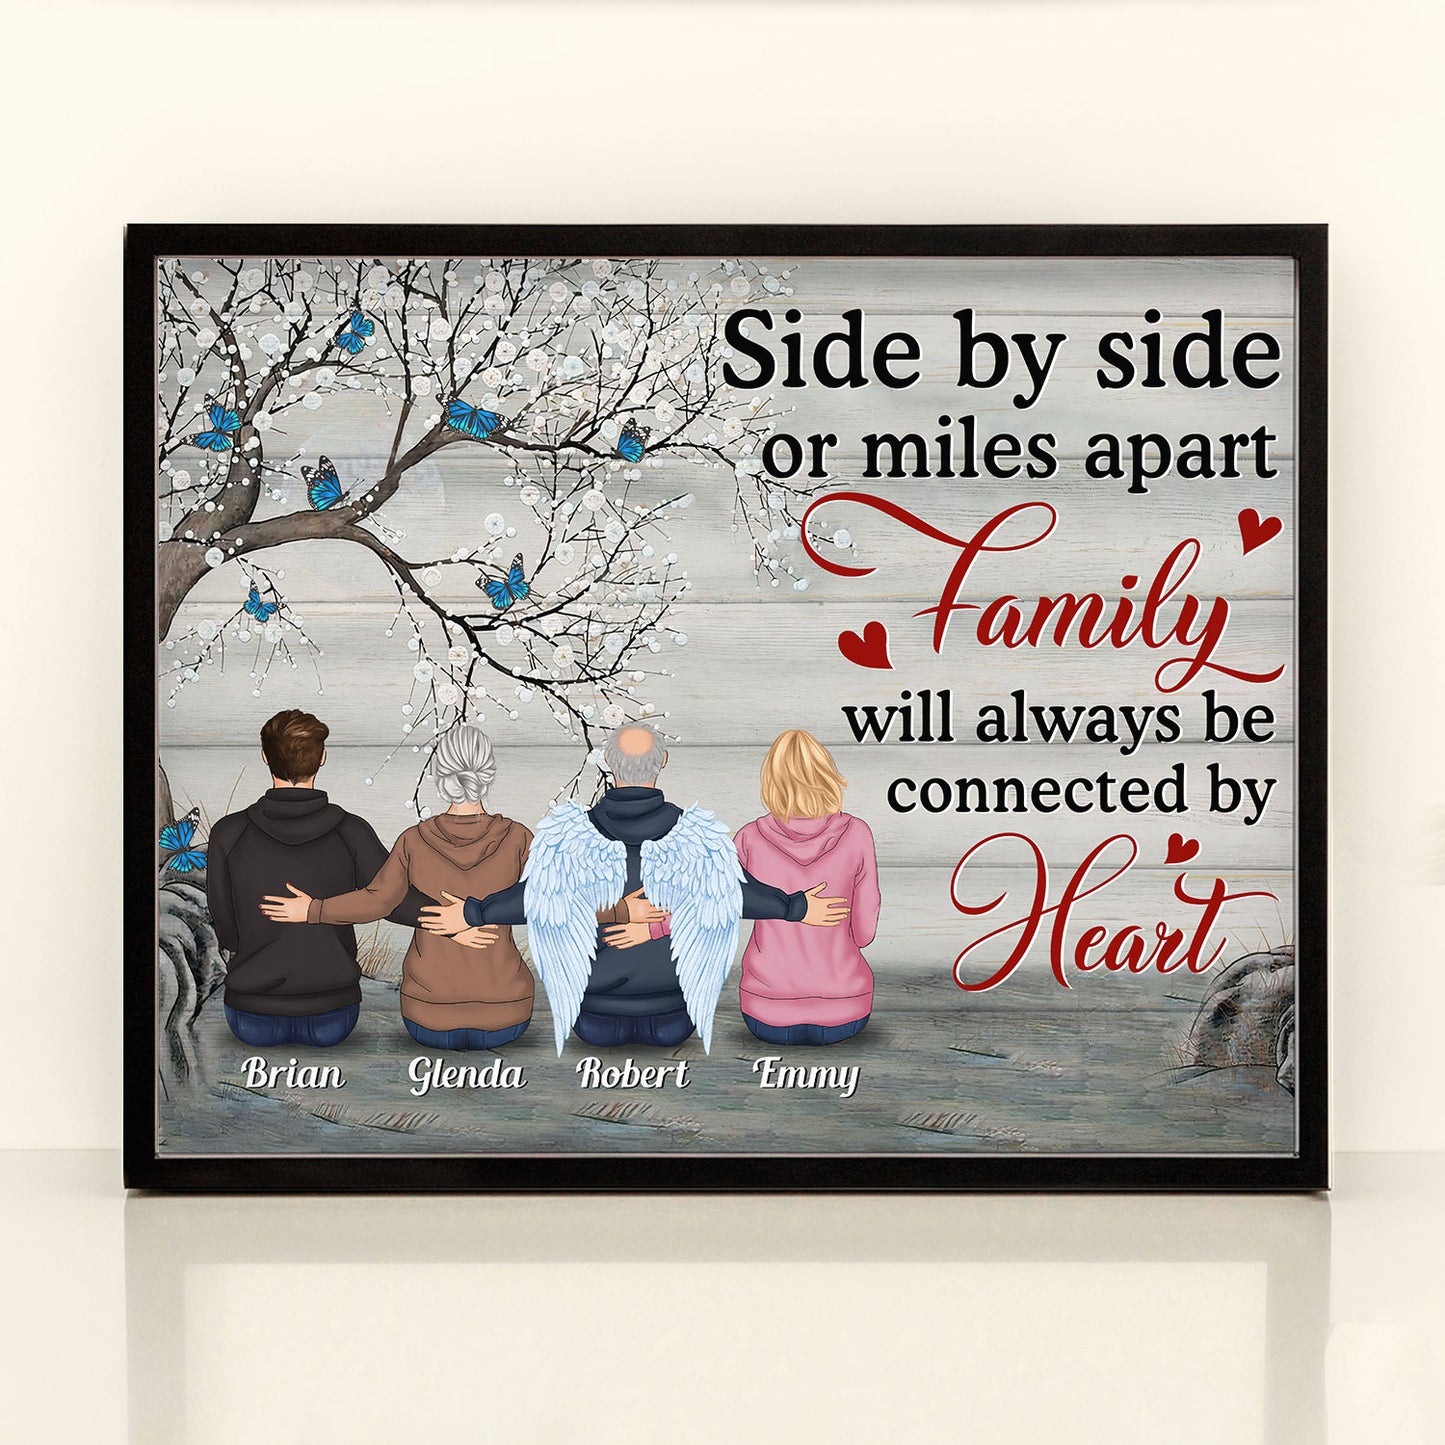 I Am Always With You - Personalized Poster - Memorial Gift For Family Members